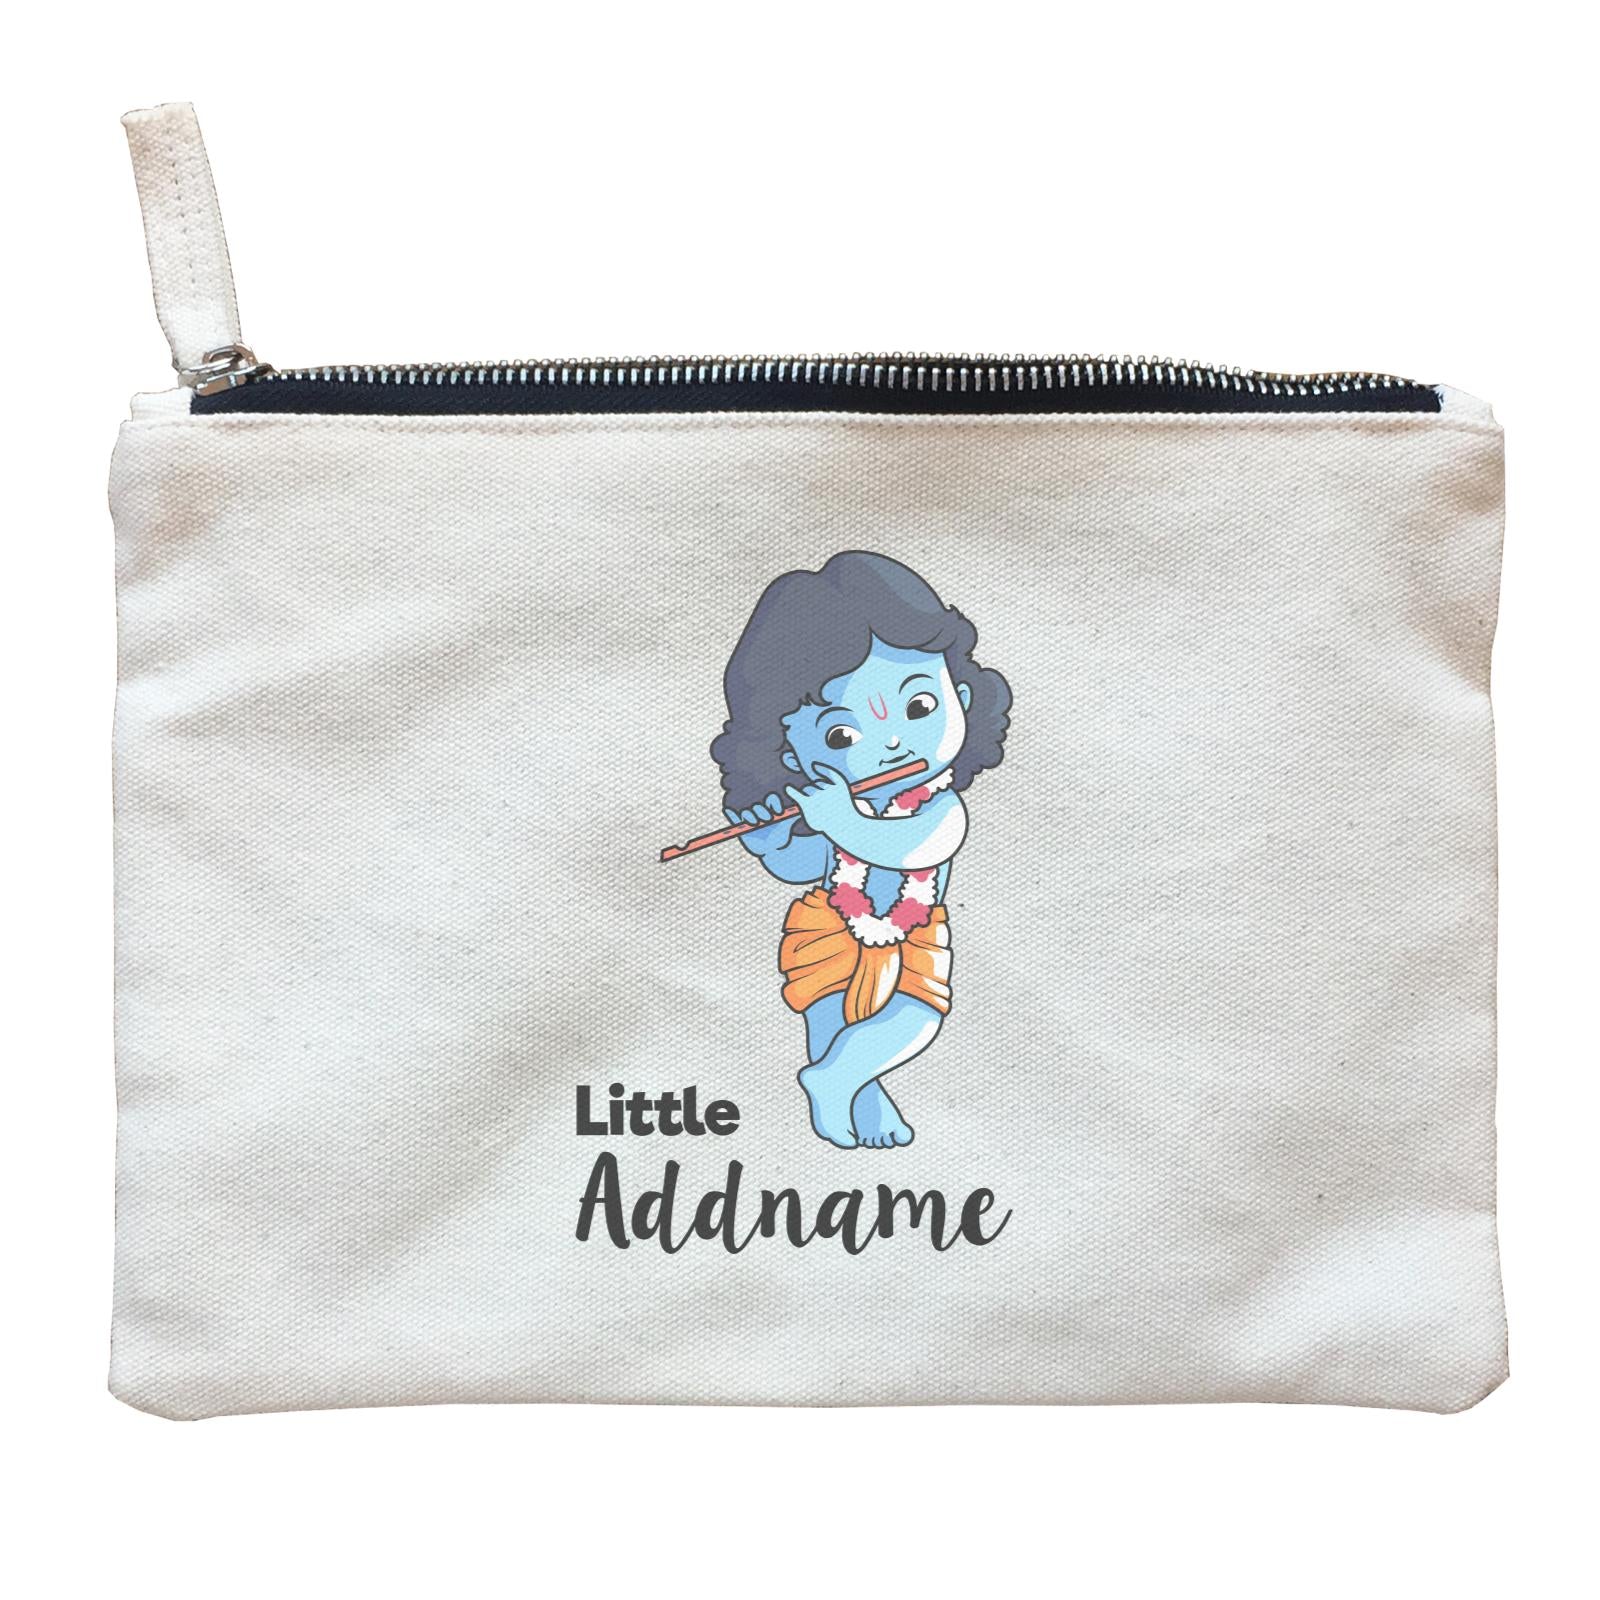 Cute Krishna With Flower Garland Playing Flute Little Addname Zipper Pouch